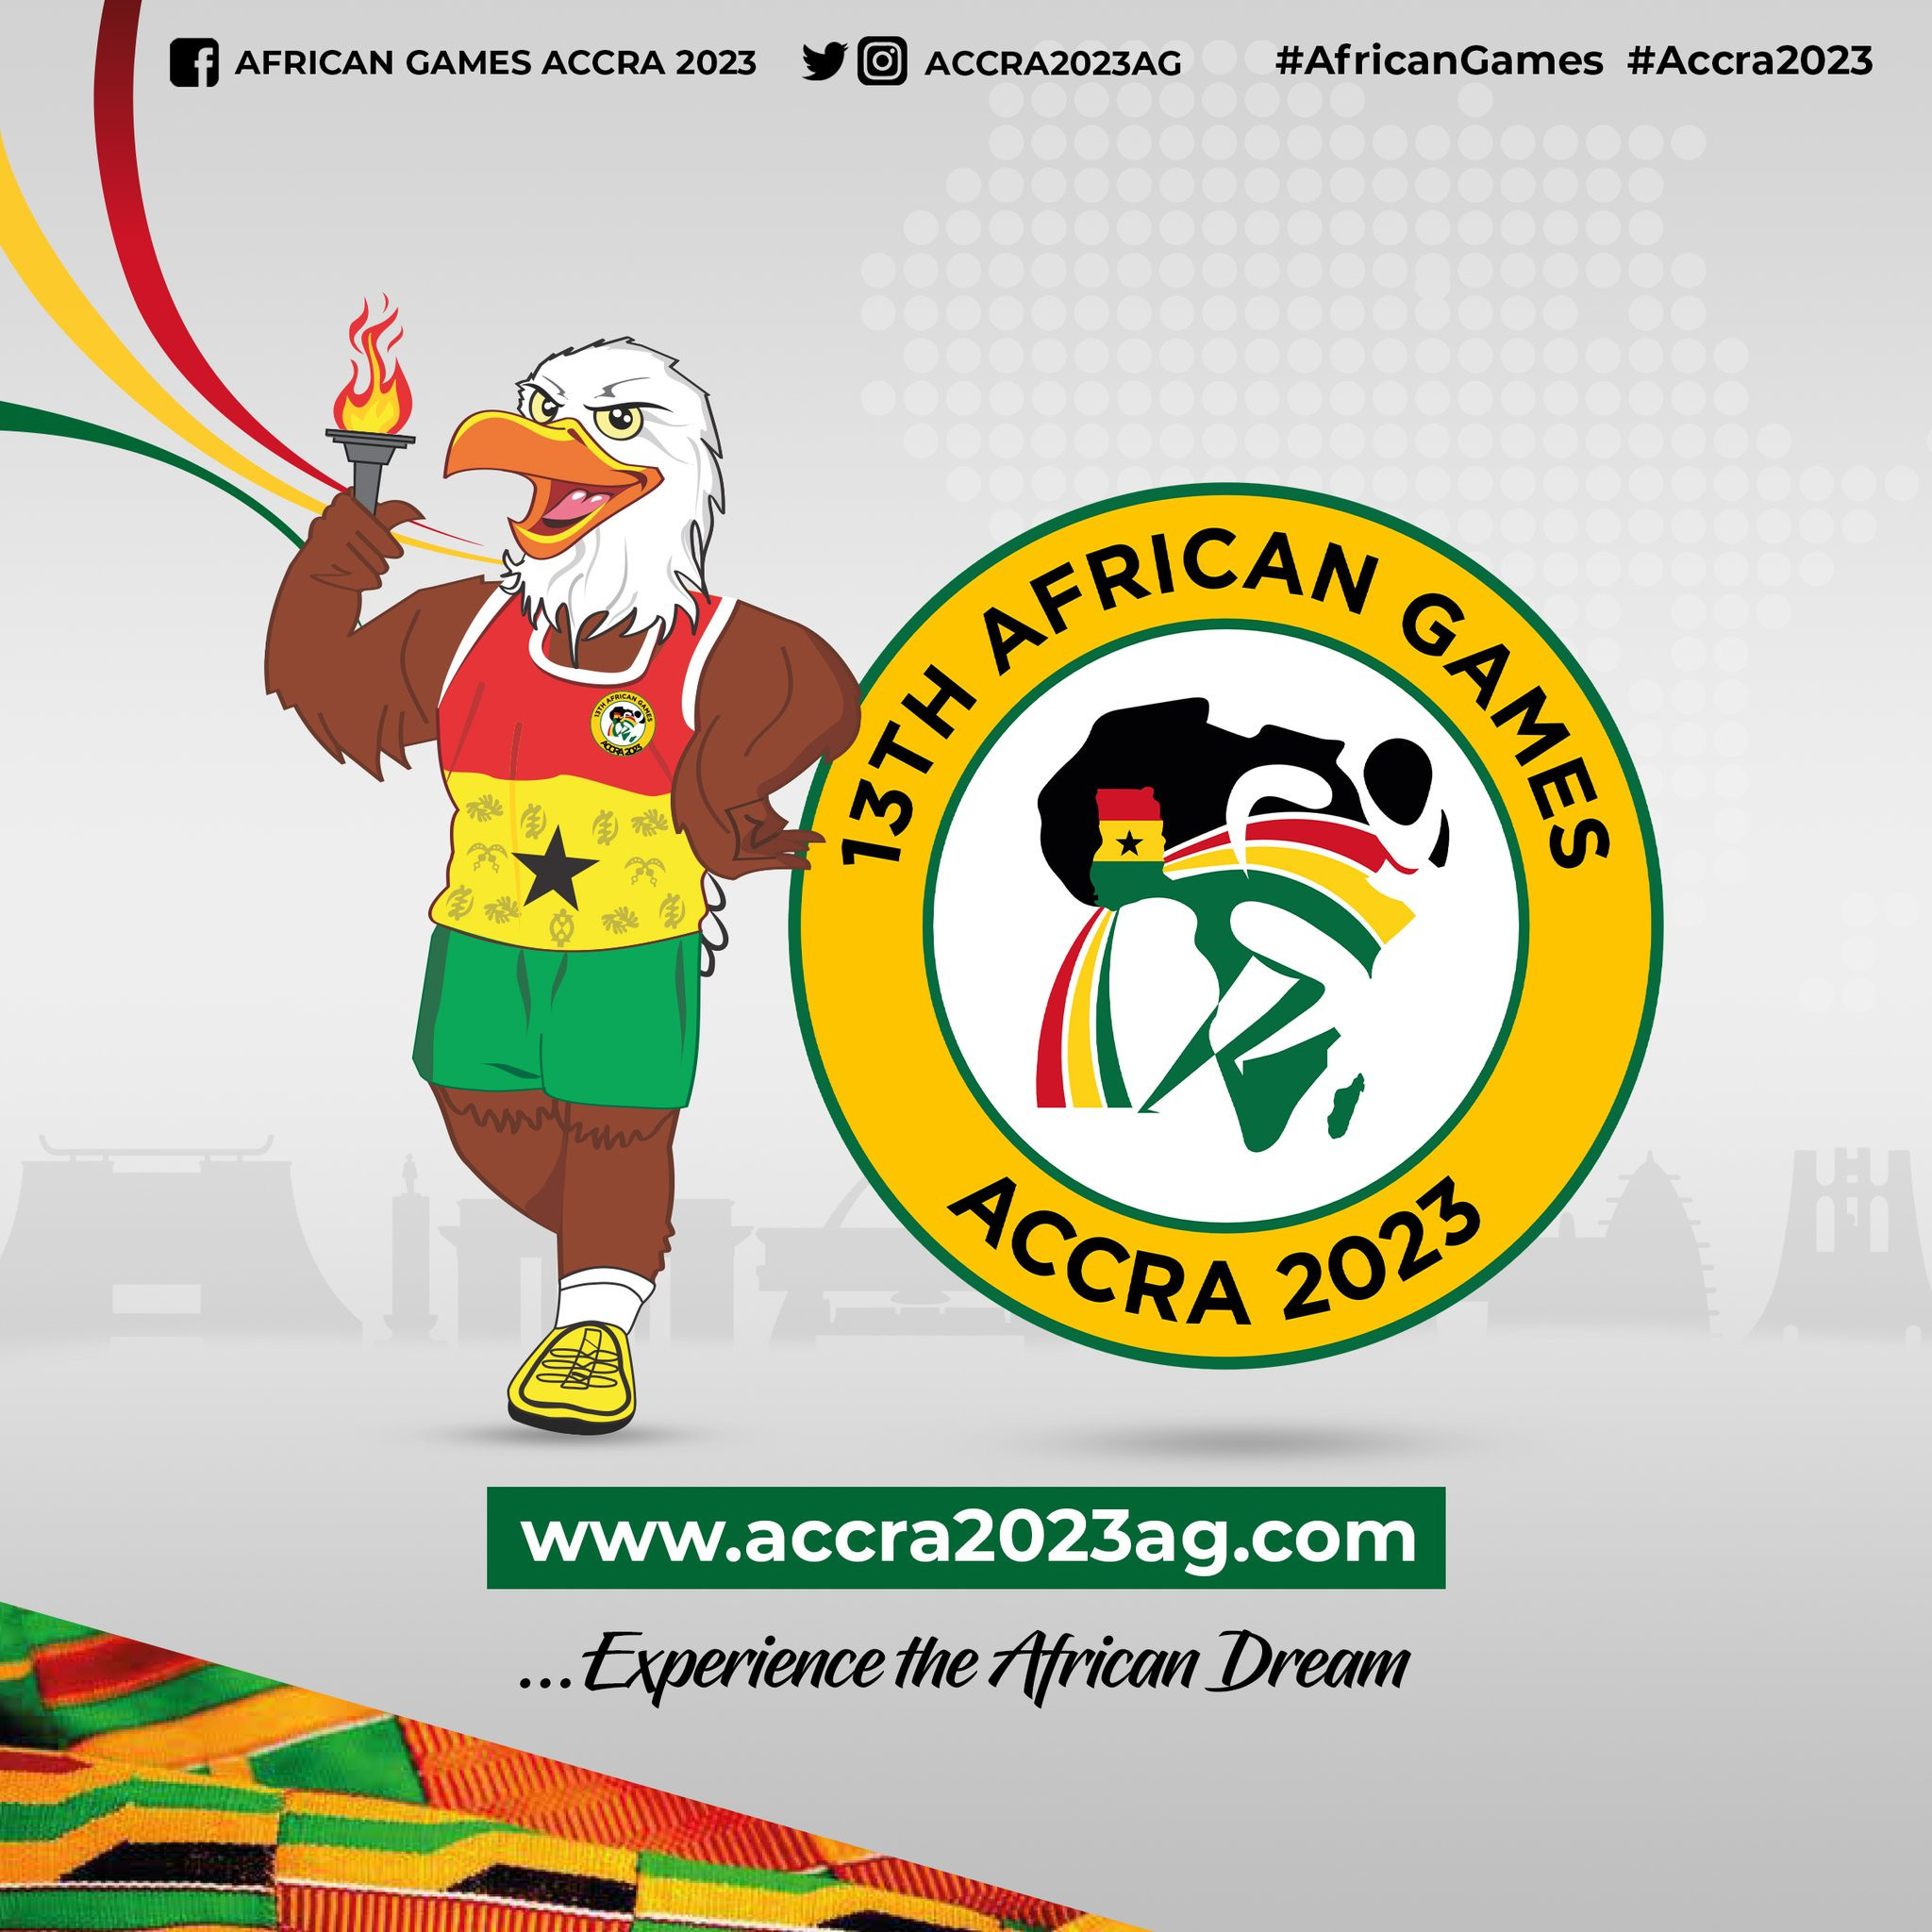 Accra 2023 is set to take place from March 8 to 23 next year but will remain known as "Accra 2023", the Local Organising Committee have announced ©Accra 2023